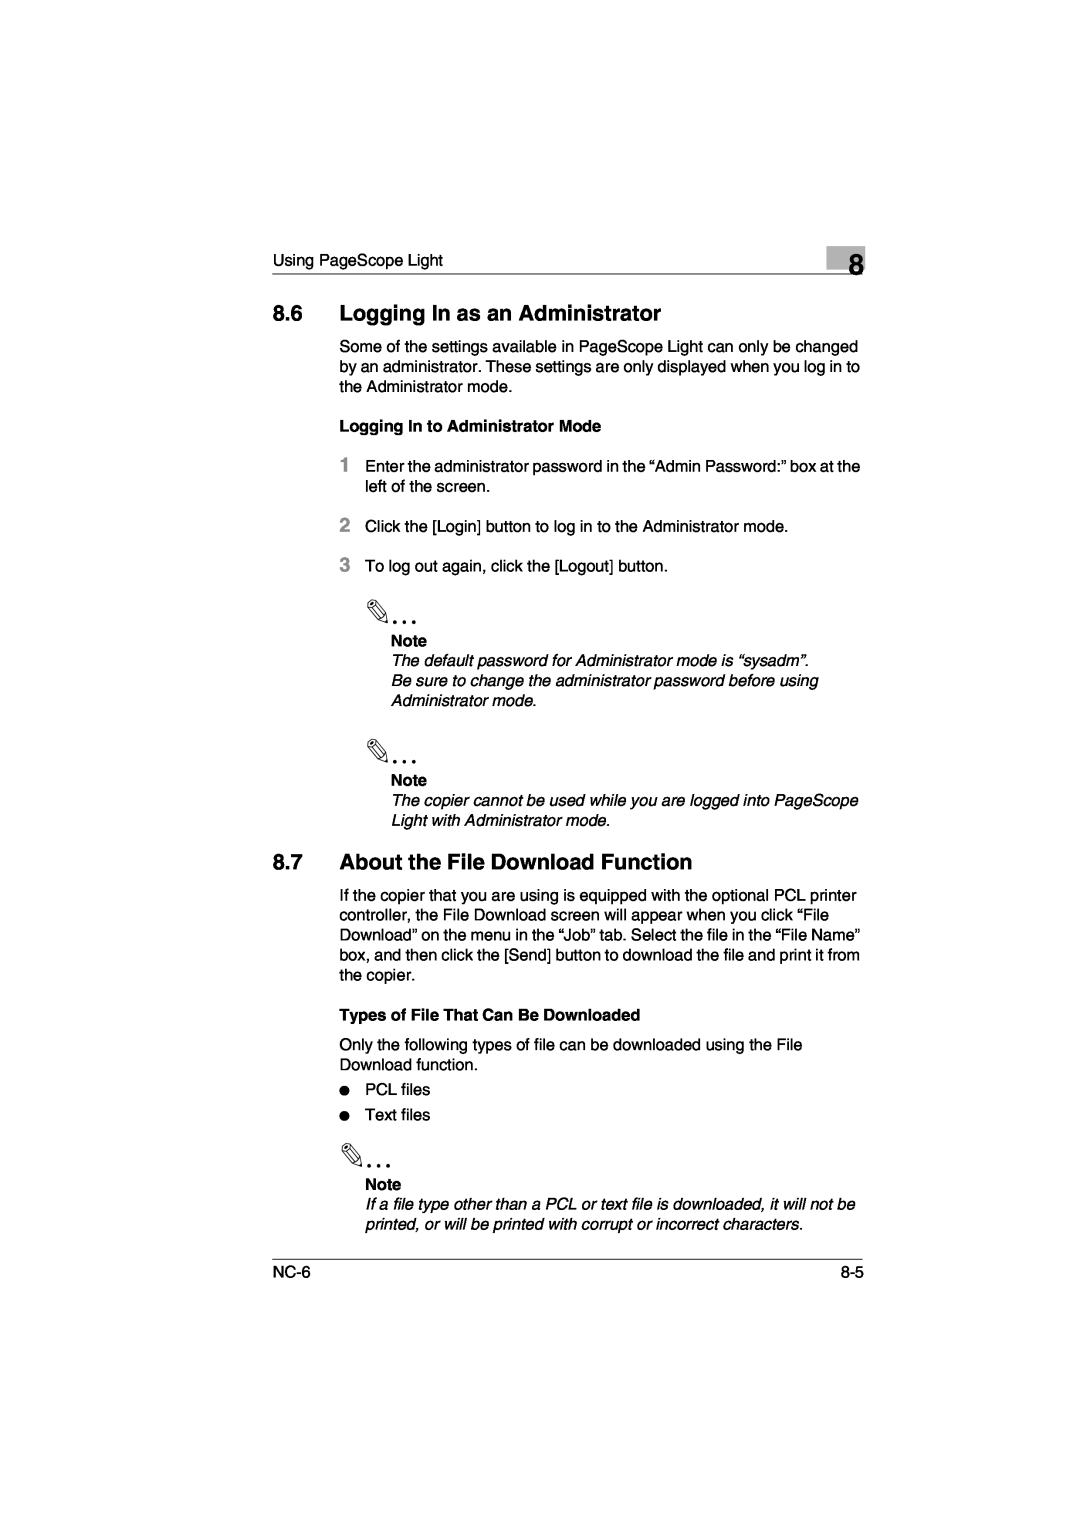 Konica Minolta NC-6 user manual Logging In as an Administrator, About the File Download Function, Administrator mode 